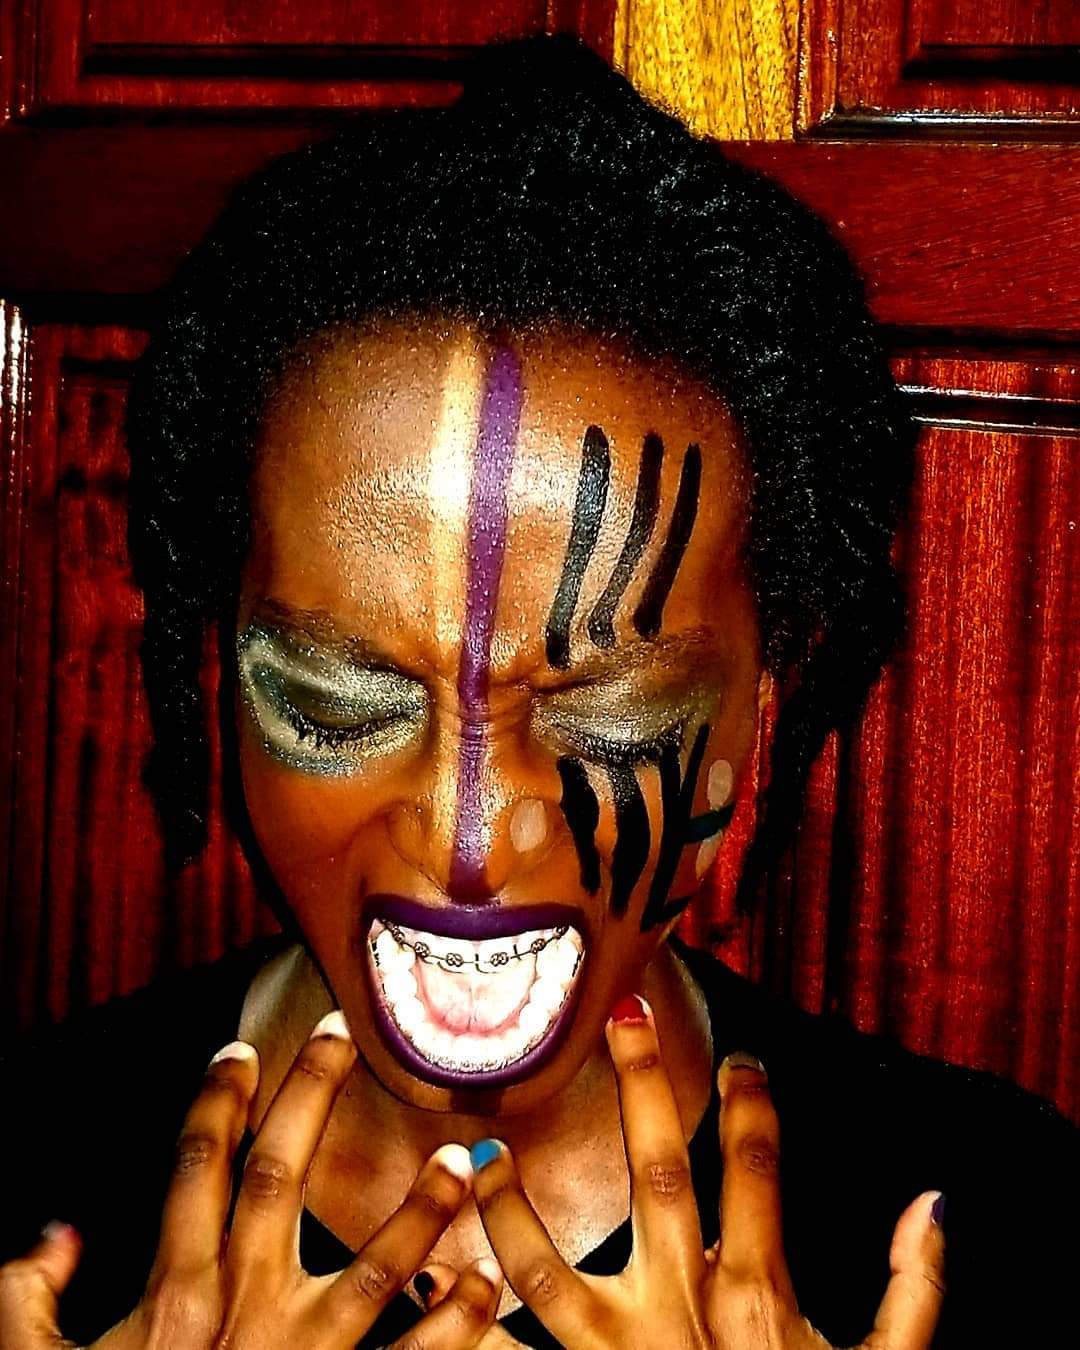 An African woman screaming with make-up art on her face.